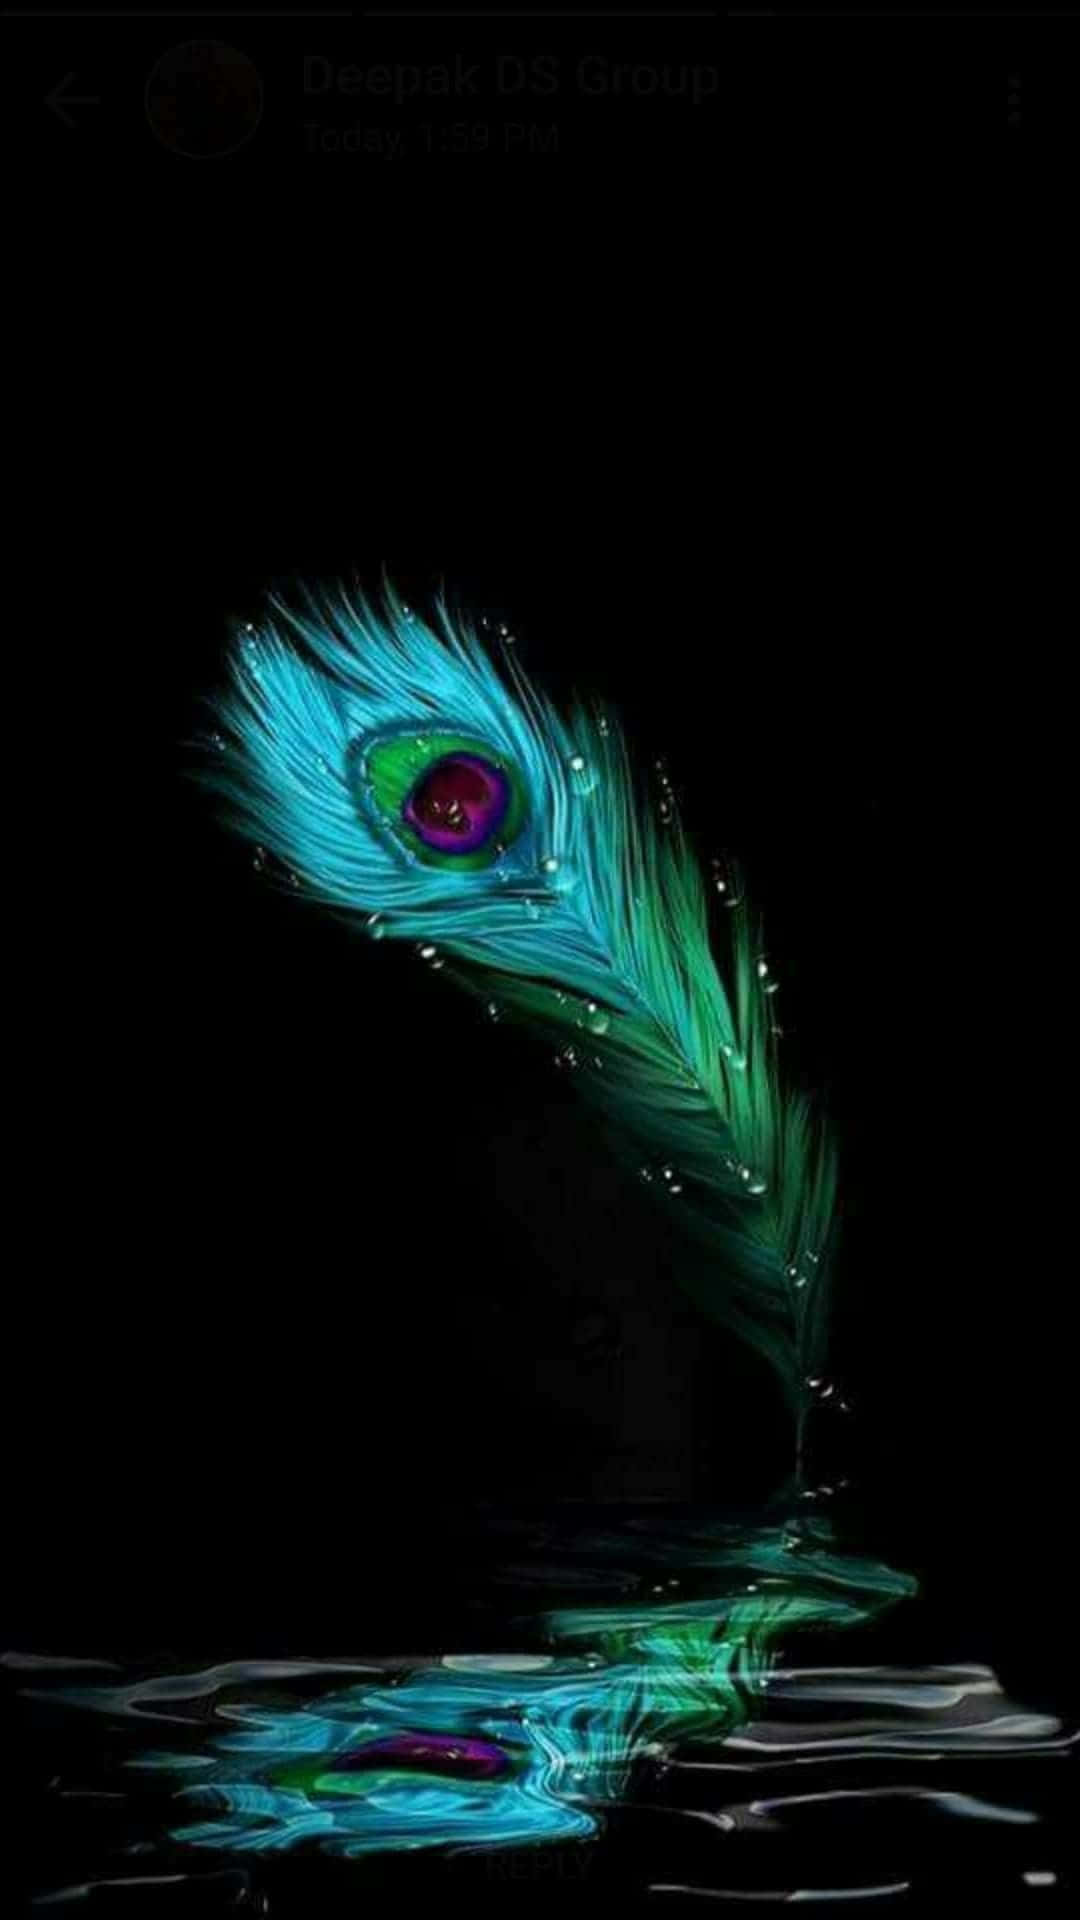 A colorful peacock feather capturing the beauty of nature